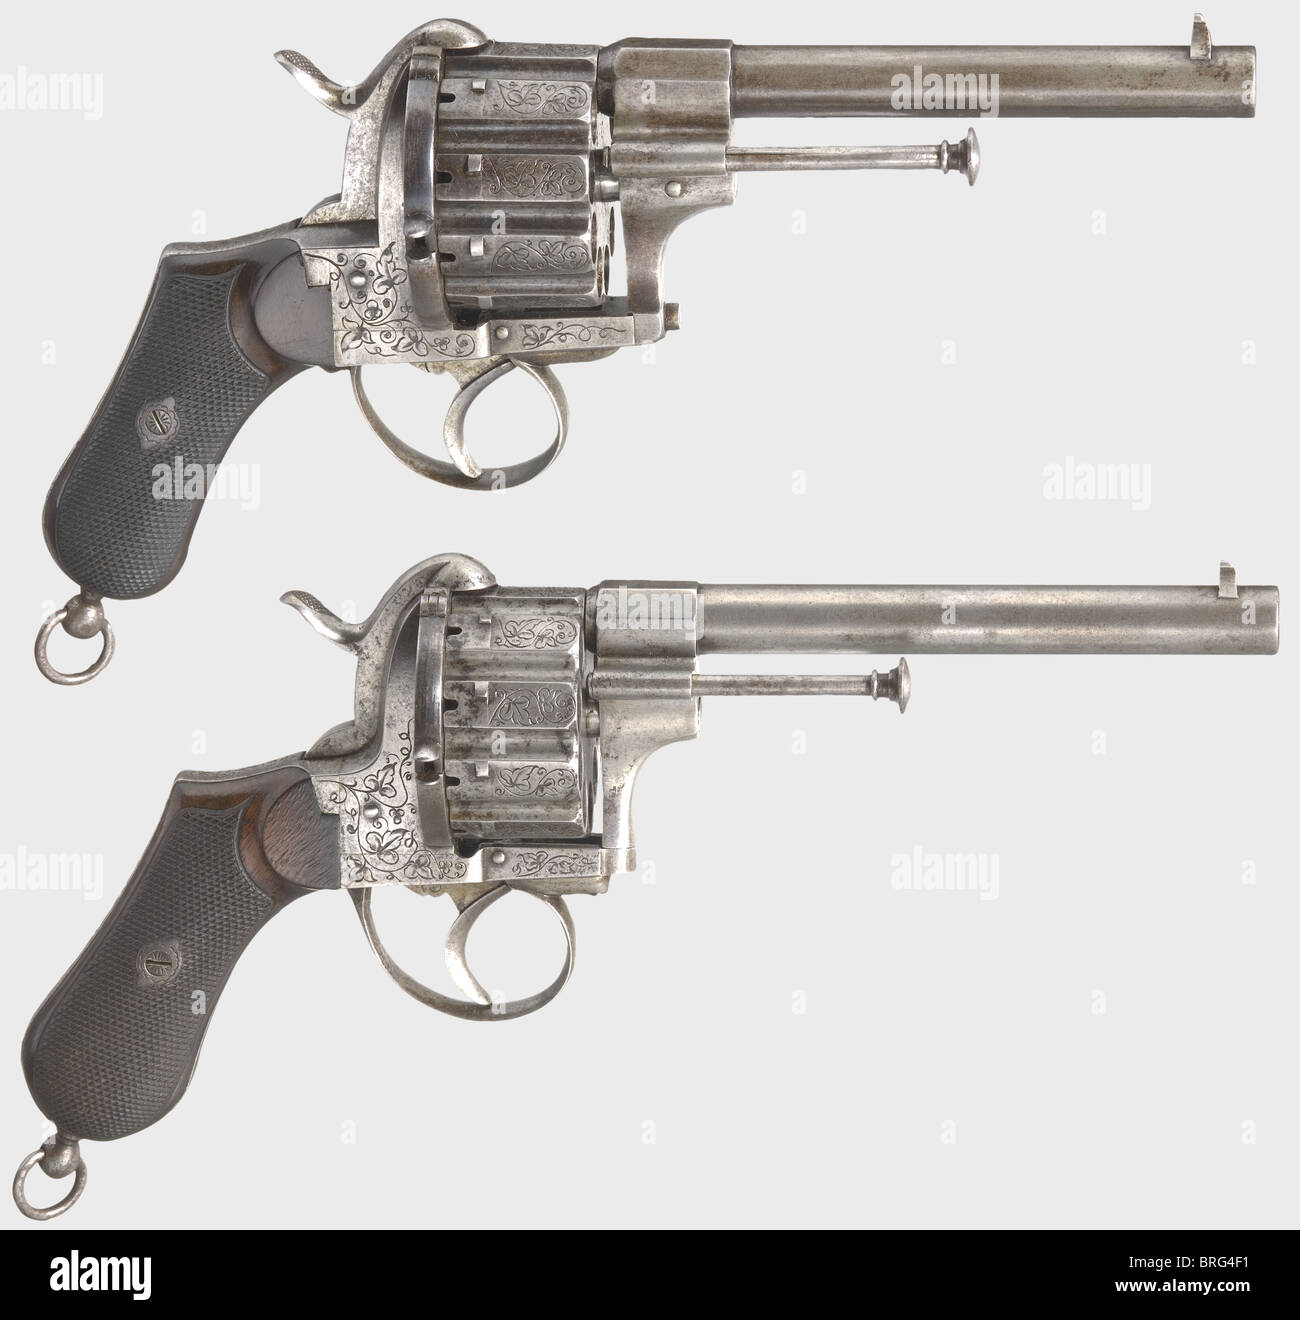 A cased pair of ten-shot pin-fire revolvers,Liège,circa 1870. 11 mm Lefaucheux calibre. Serial numbers 107790 and 110566. Slightly different revolvers with ten-shot cylinders. Frames and cylinders are engraved with grape leaf decoration. Walnut grip panels with fine checkering. Lanyard rings. Length of each 29 cm. In a later(?)case lined with green felt,also containing powder flask,bullet mould,and cleaning rod. Lockable. Key present. Case dimensions 43 x 24 x 9,5 cm. Erwerbsscheinpflichtig. historic,historical,19th century,civil handgun,civil handgun,Additional-Rights-Clearences-Not Available Stock Photo